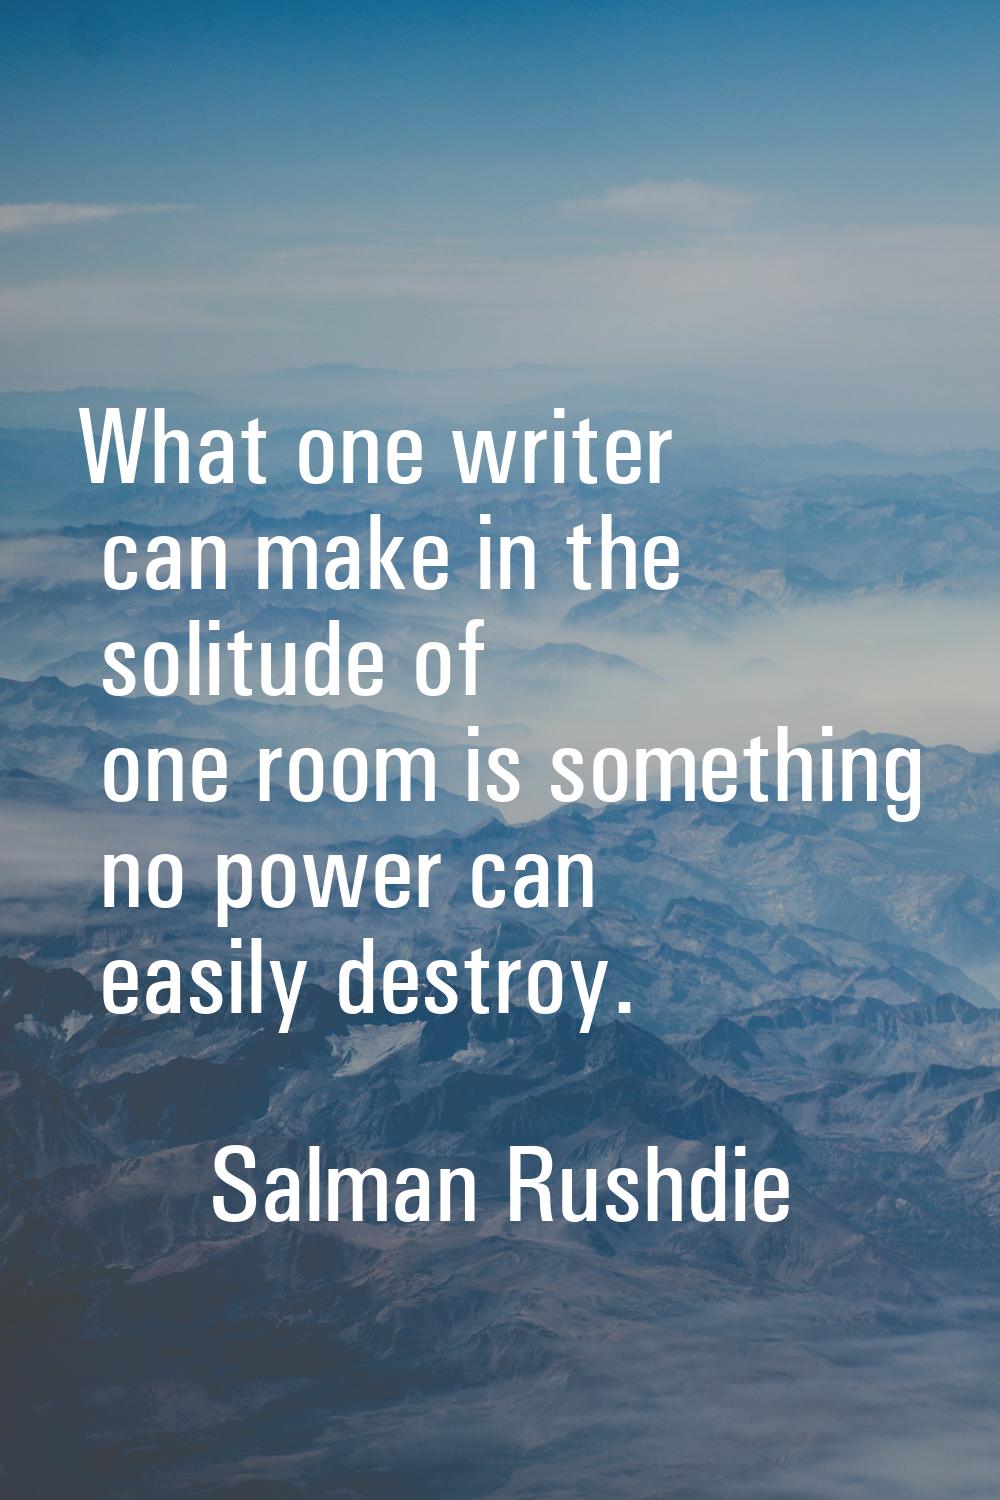 What one writer can make in the solitude of one room is something no power can easily destroy.